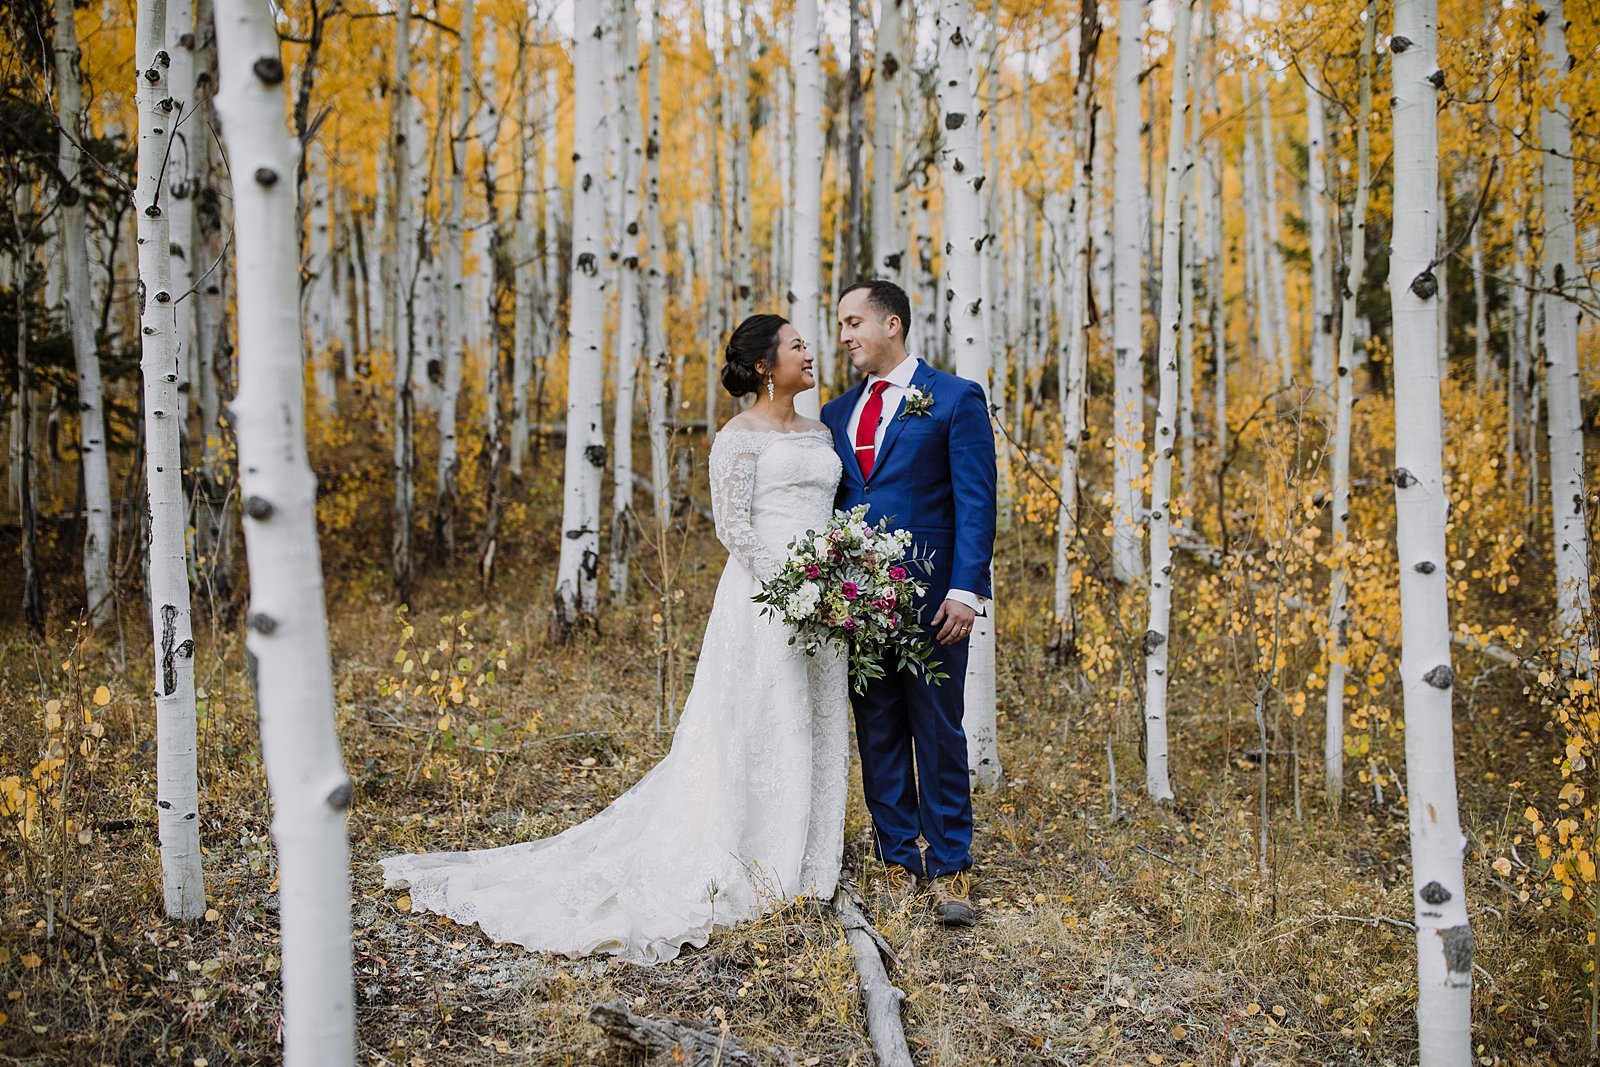 elopement ceremony in an aspen grove, ames colorado elopement, alta lakes elopement, ophir colorado elopement, telluride colorado wedding, hope lake elopement, priest lake elopement